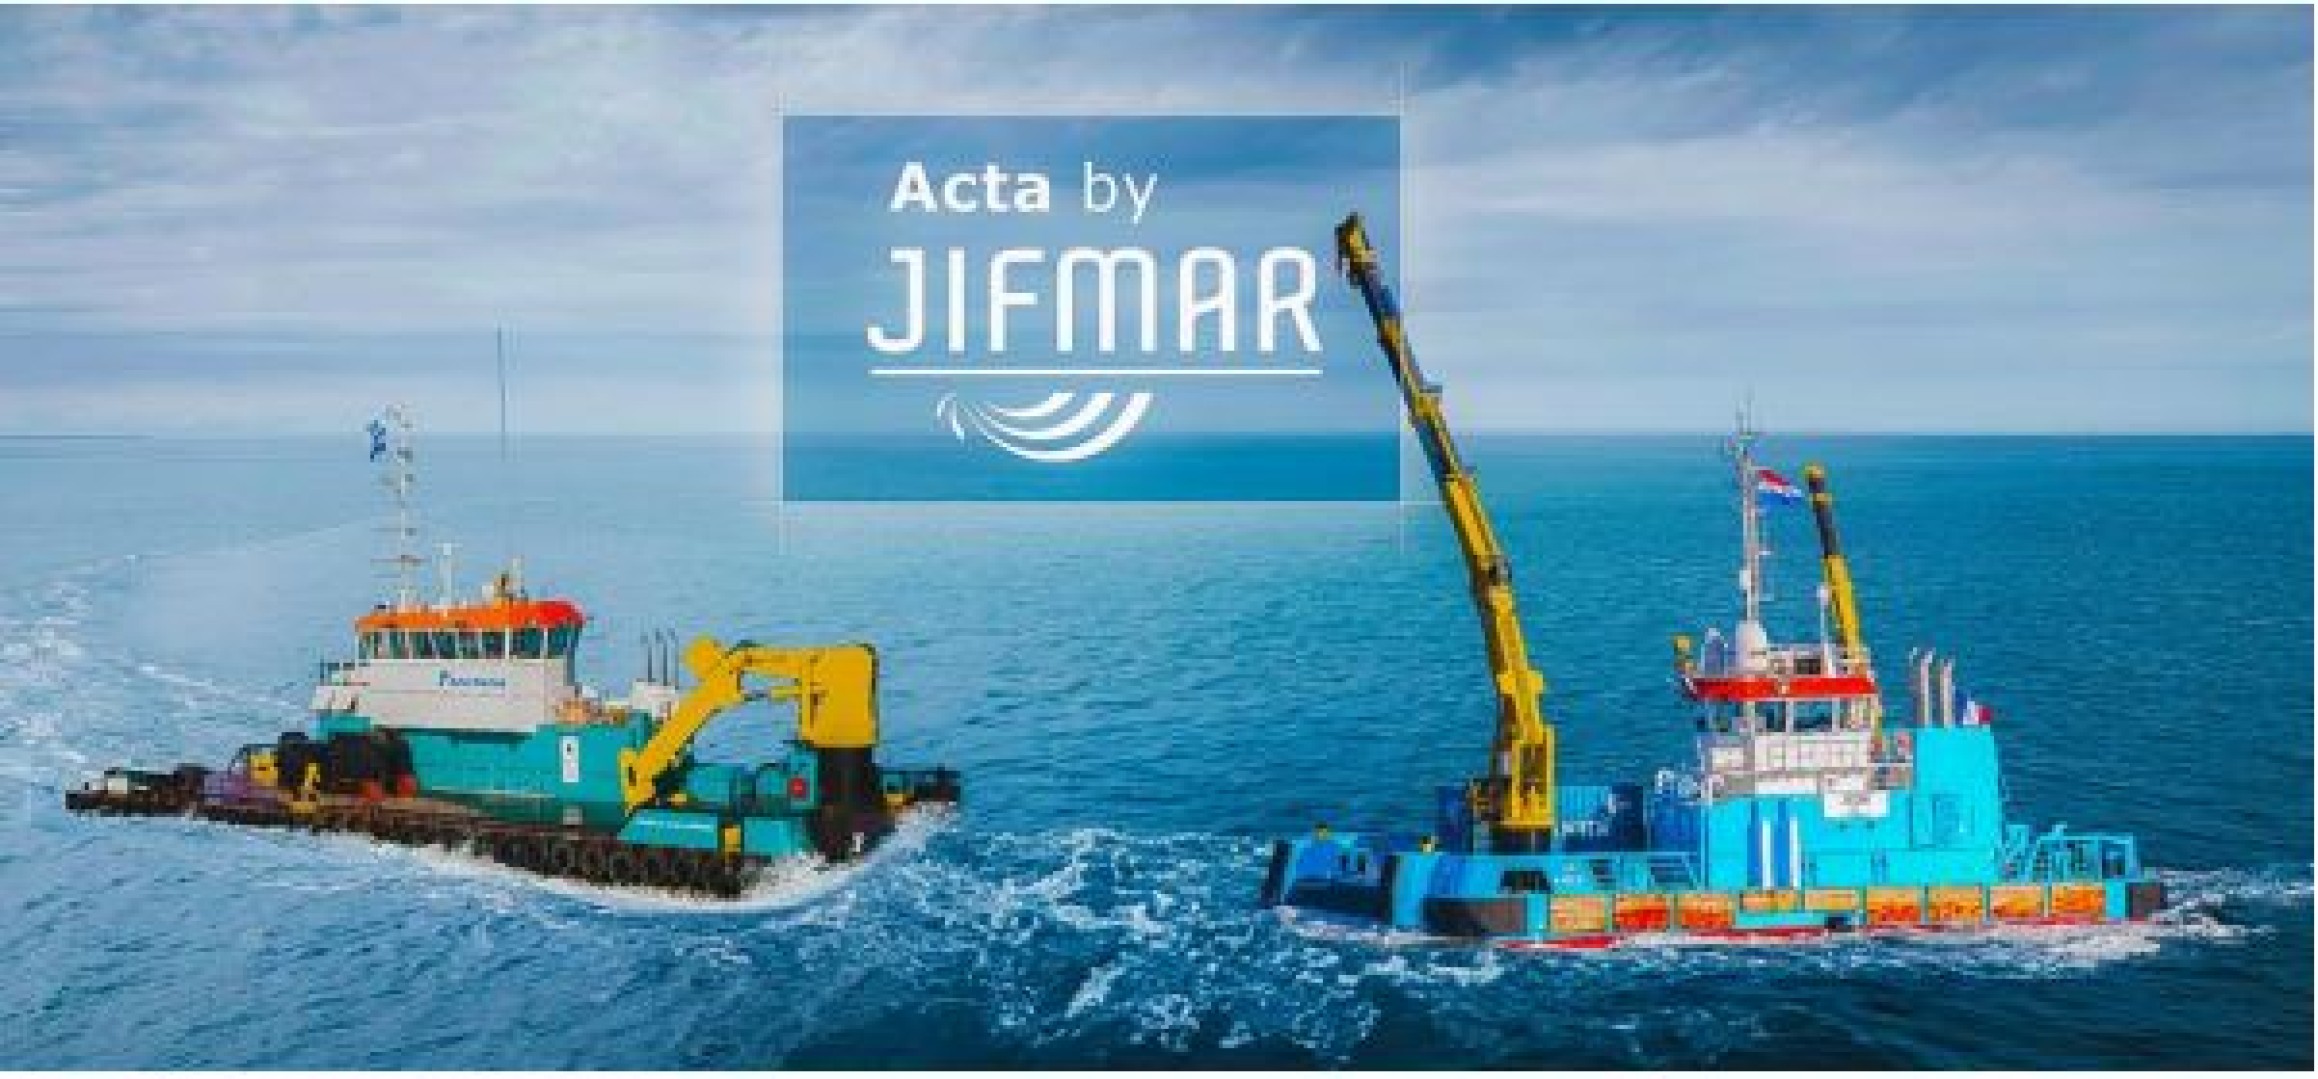 Jifmar to acquire all workboat activities from Acta marine